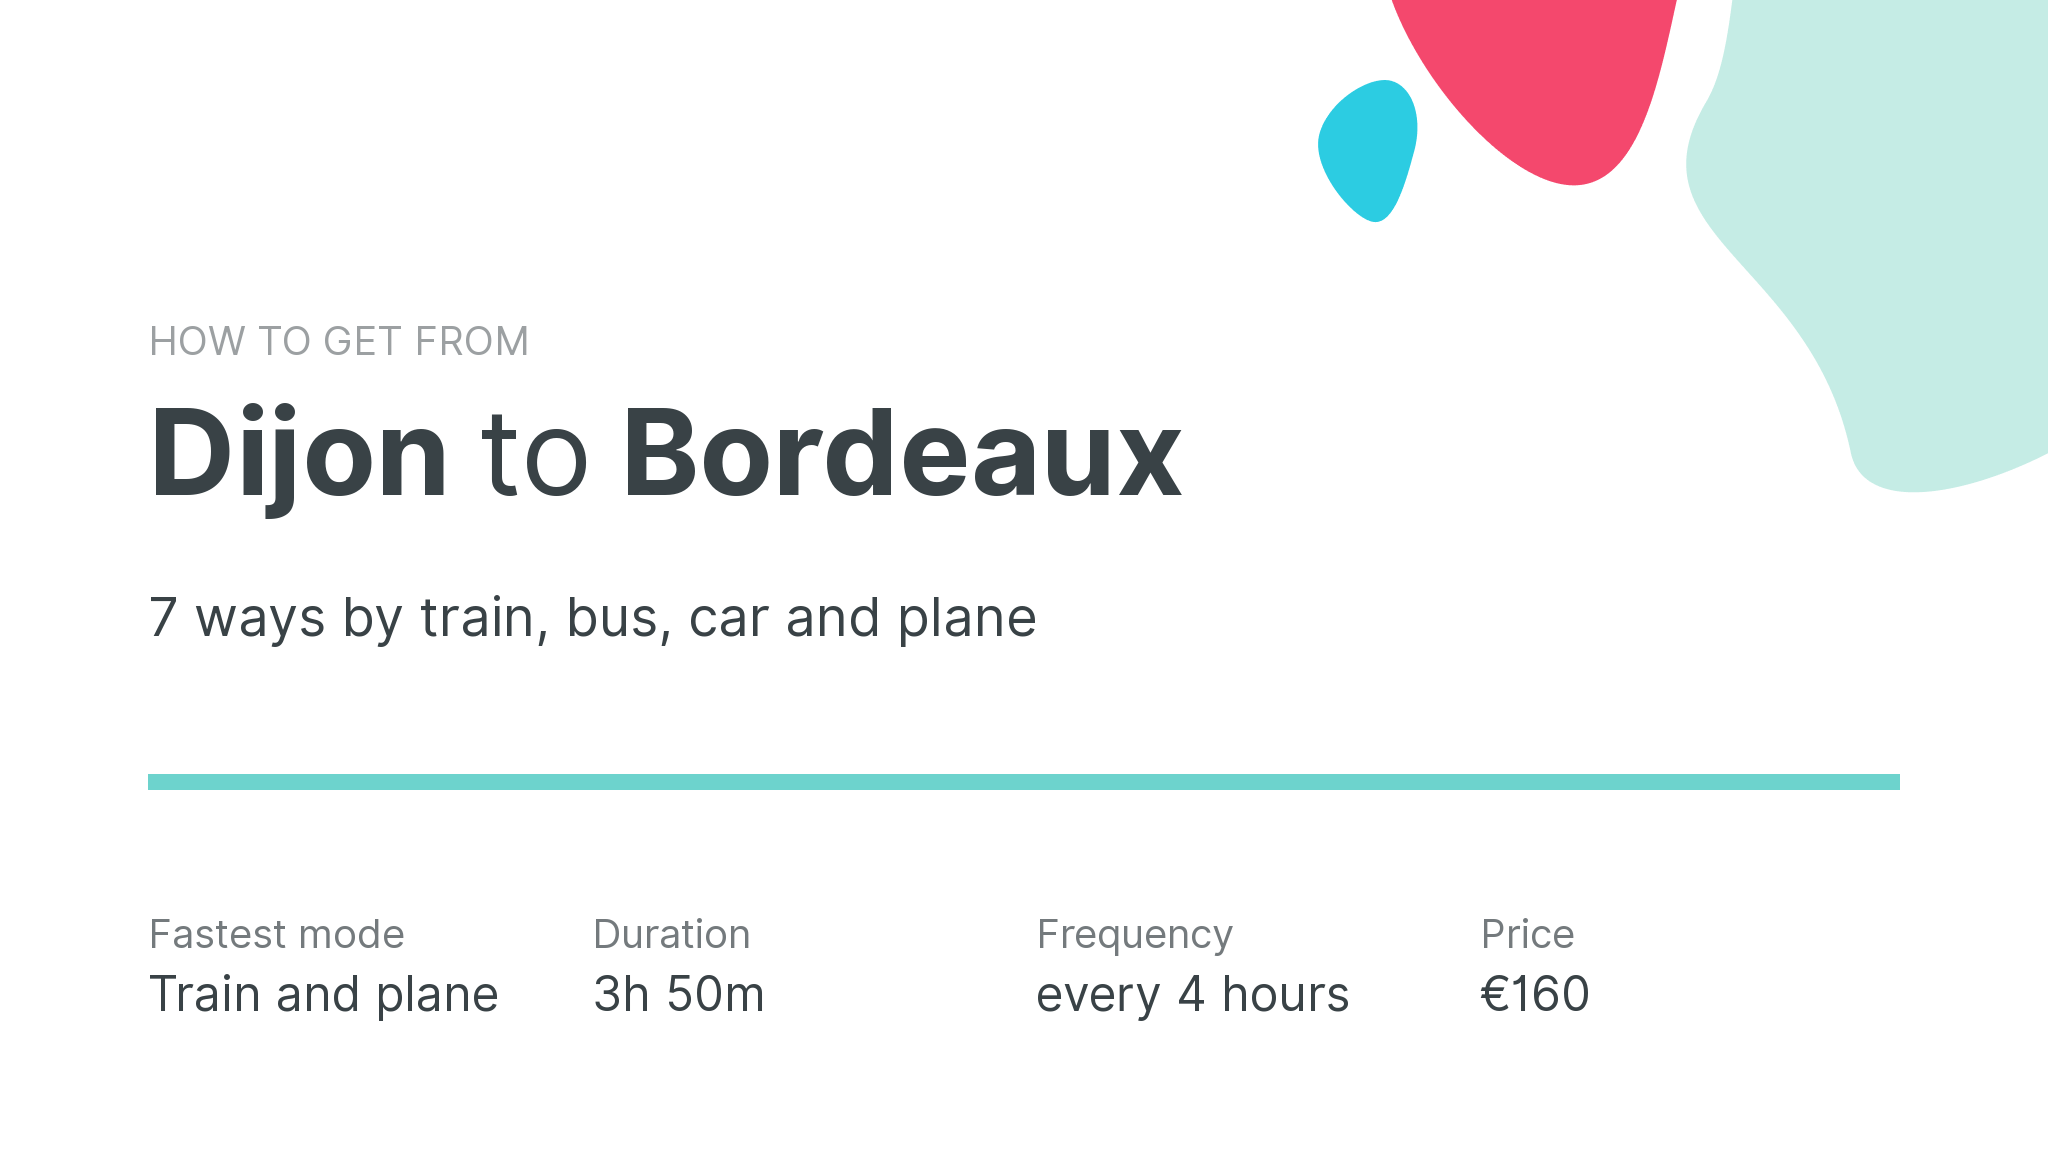 How do I get from Dijon to Bordeaux